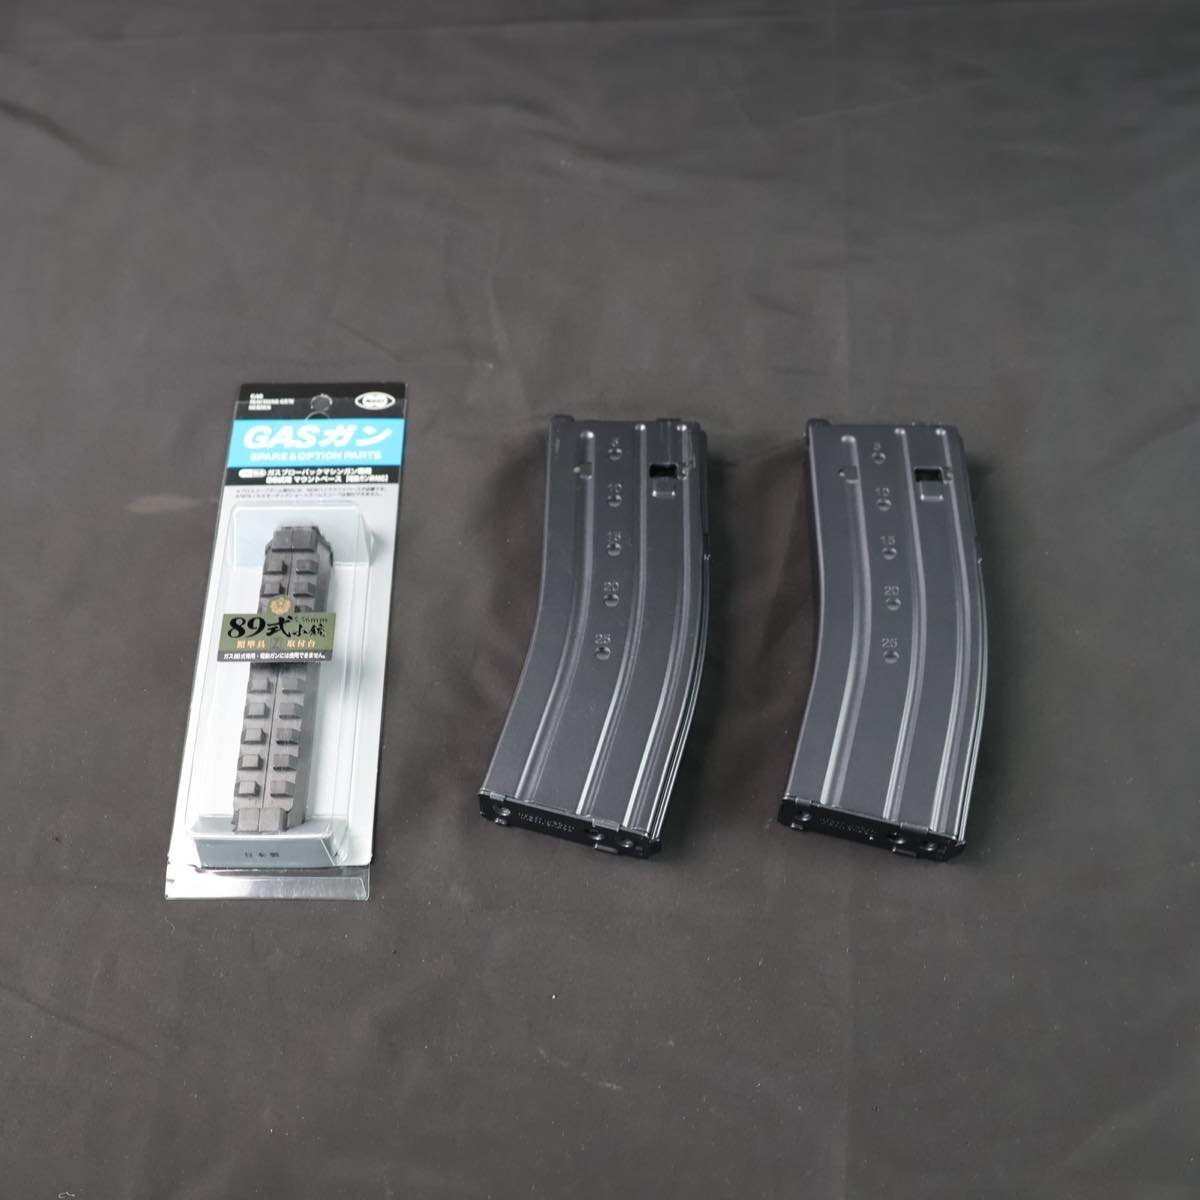  Tokyo Marui 89 type gas blowback for mount base, spare magazine 2 ps #S-8509